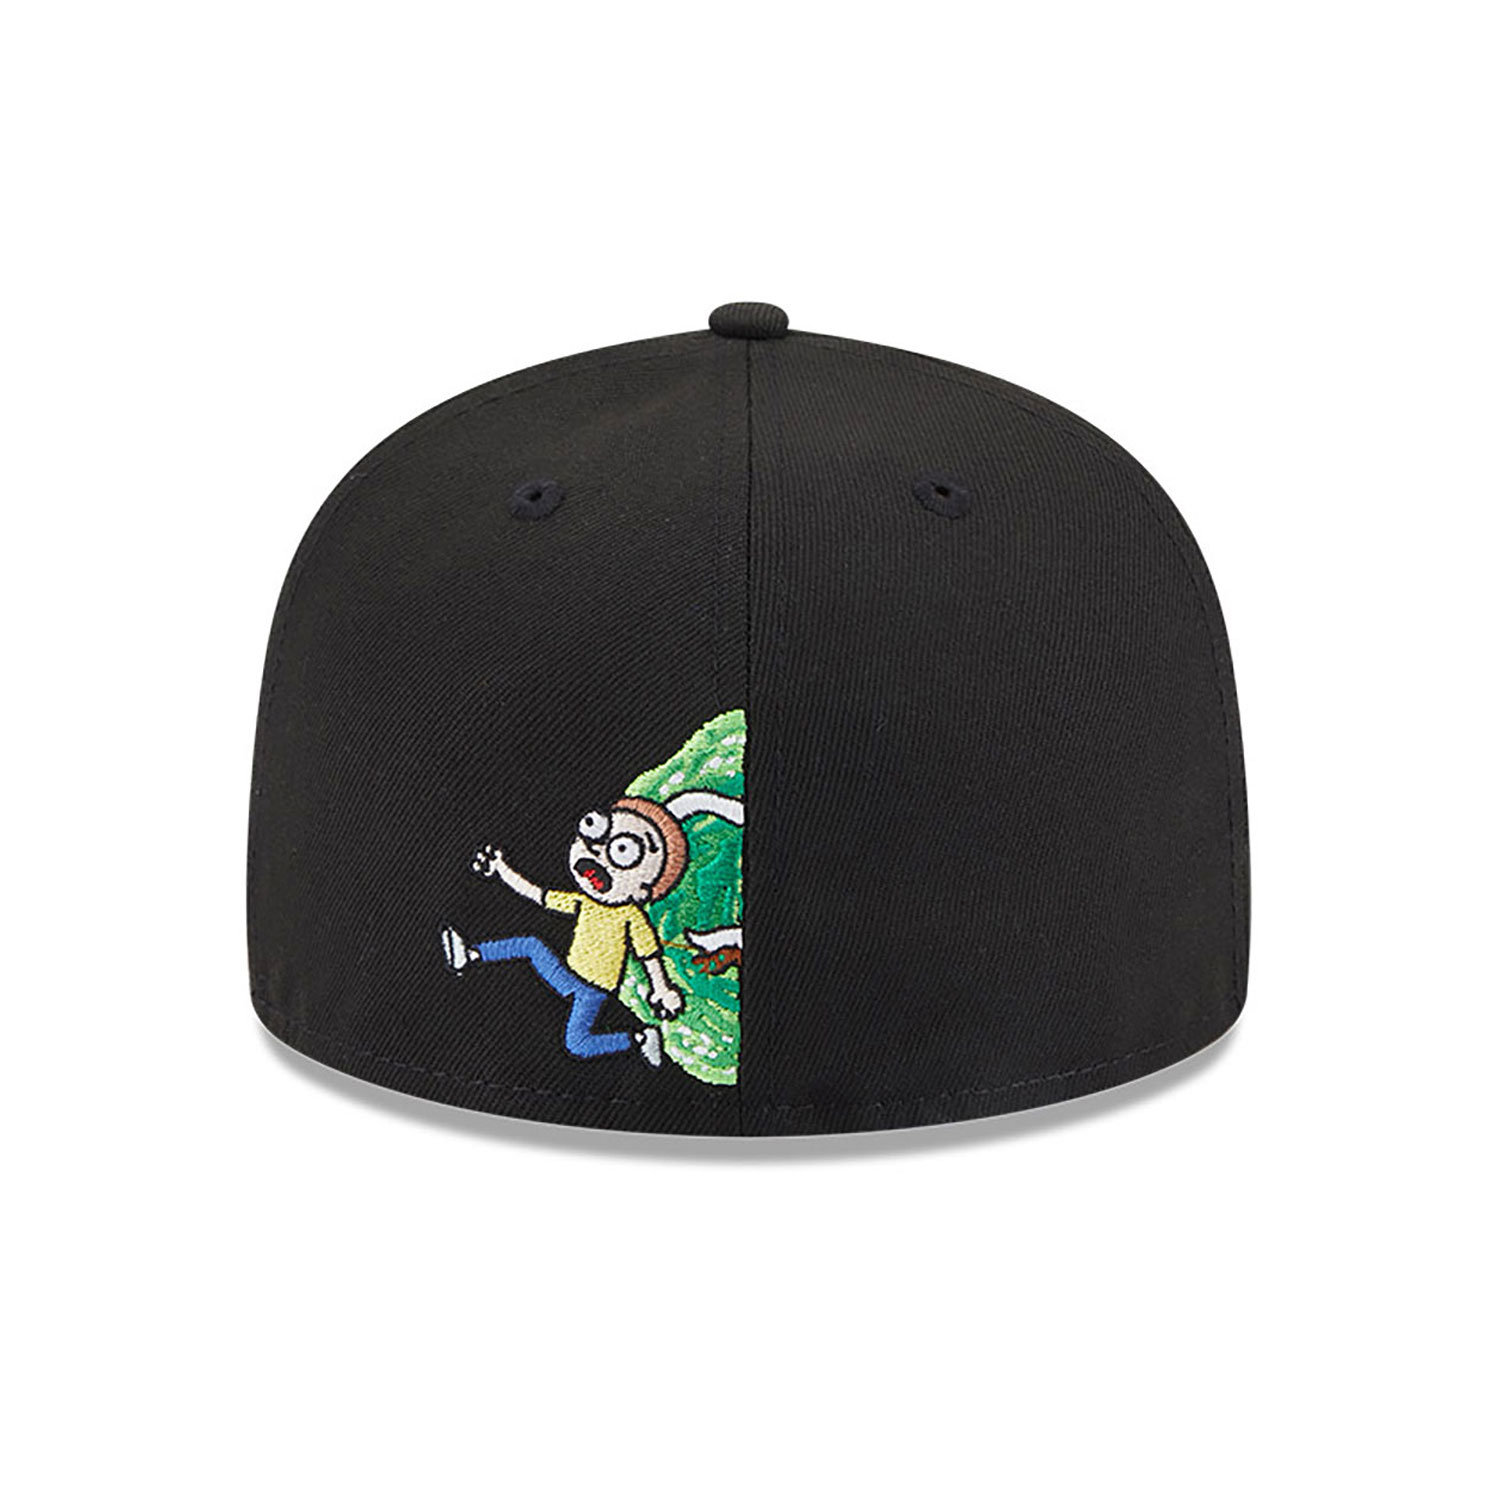 Rick And Morty Black 59FIFTY Fitted Cap